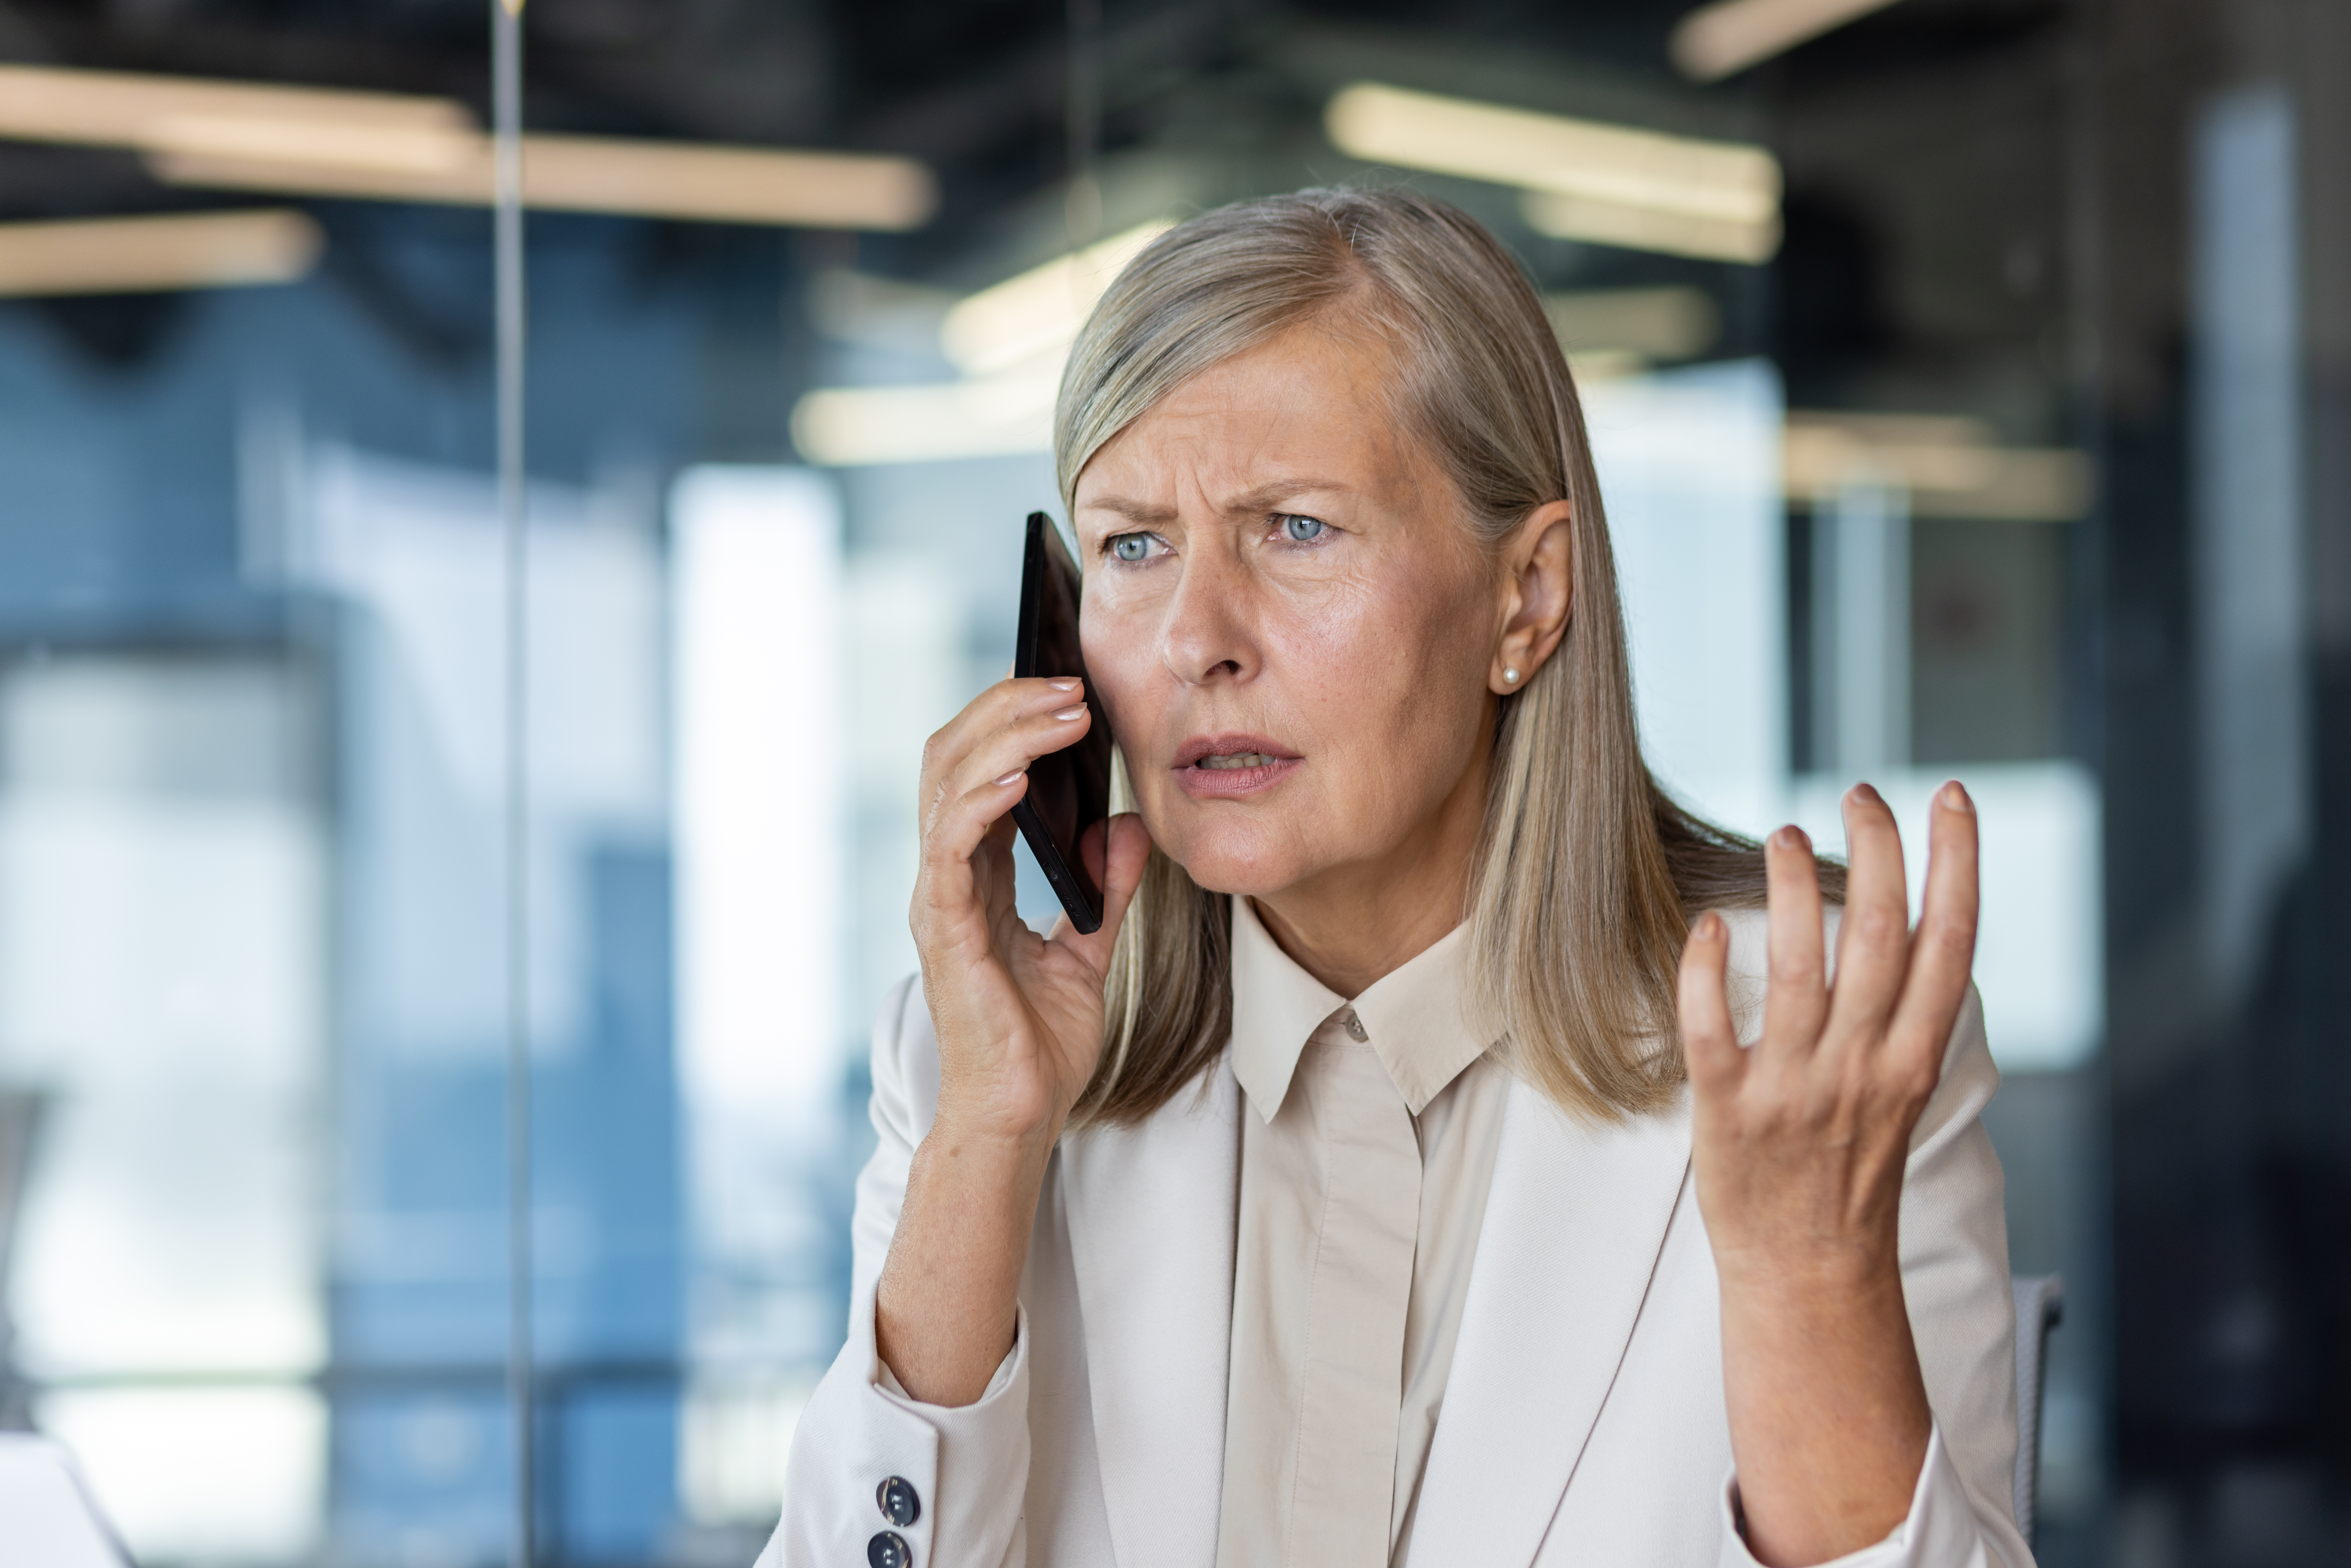 An upset older woman talking to someone on the phone | Source: Getty Images